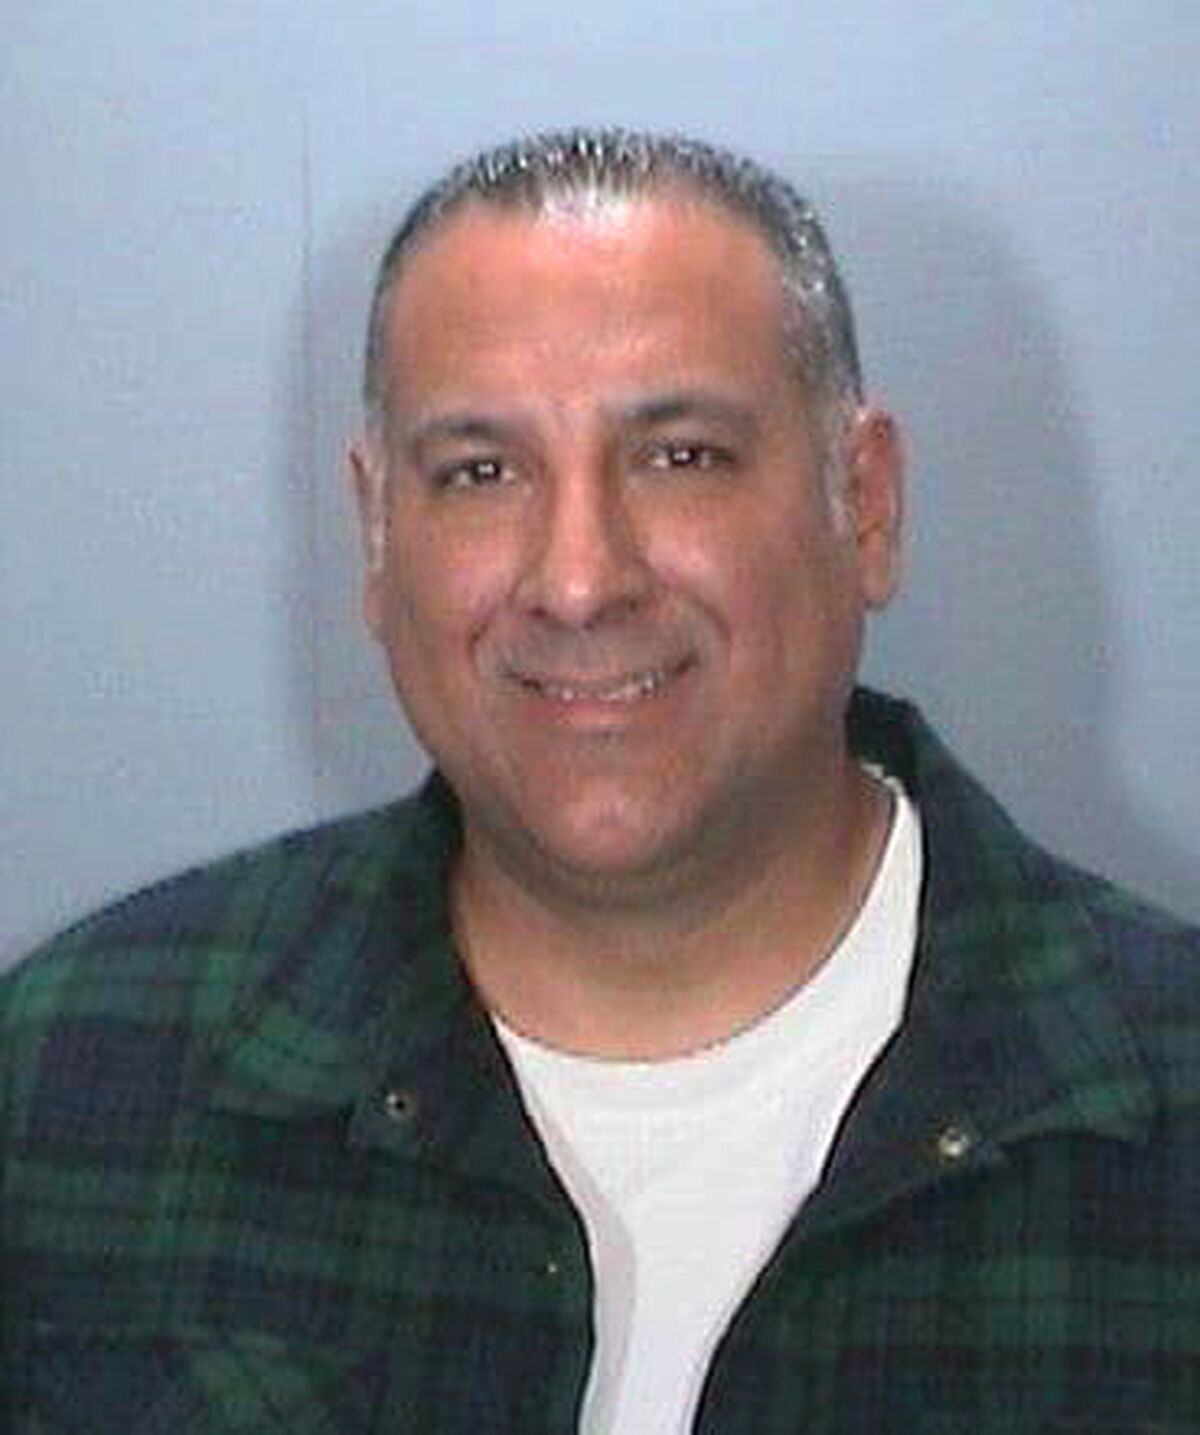 FILE - This undated booking photo released by the Orange, Calif., Police Department shows Los Angeles Police Officer Matthew Calleros. The veteran Los Angeles police officer was sentenced to six months in jail after pleading guilty to stealing a $29,000 pickup truck from a dealership, according to court records. (Orange Police Department via AP, File)